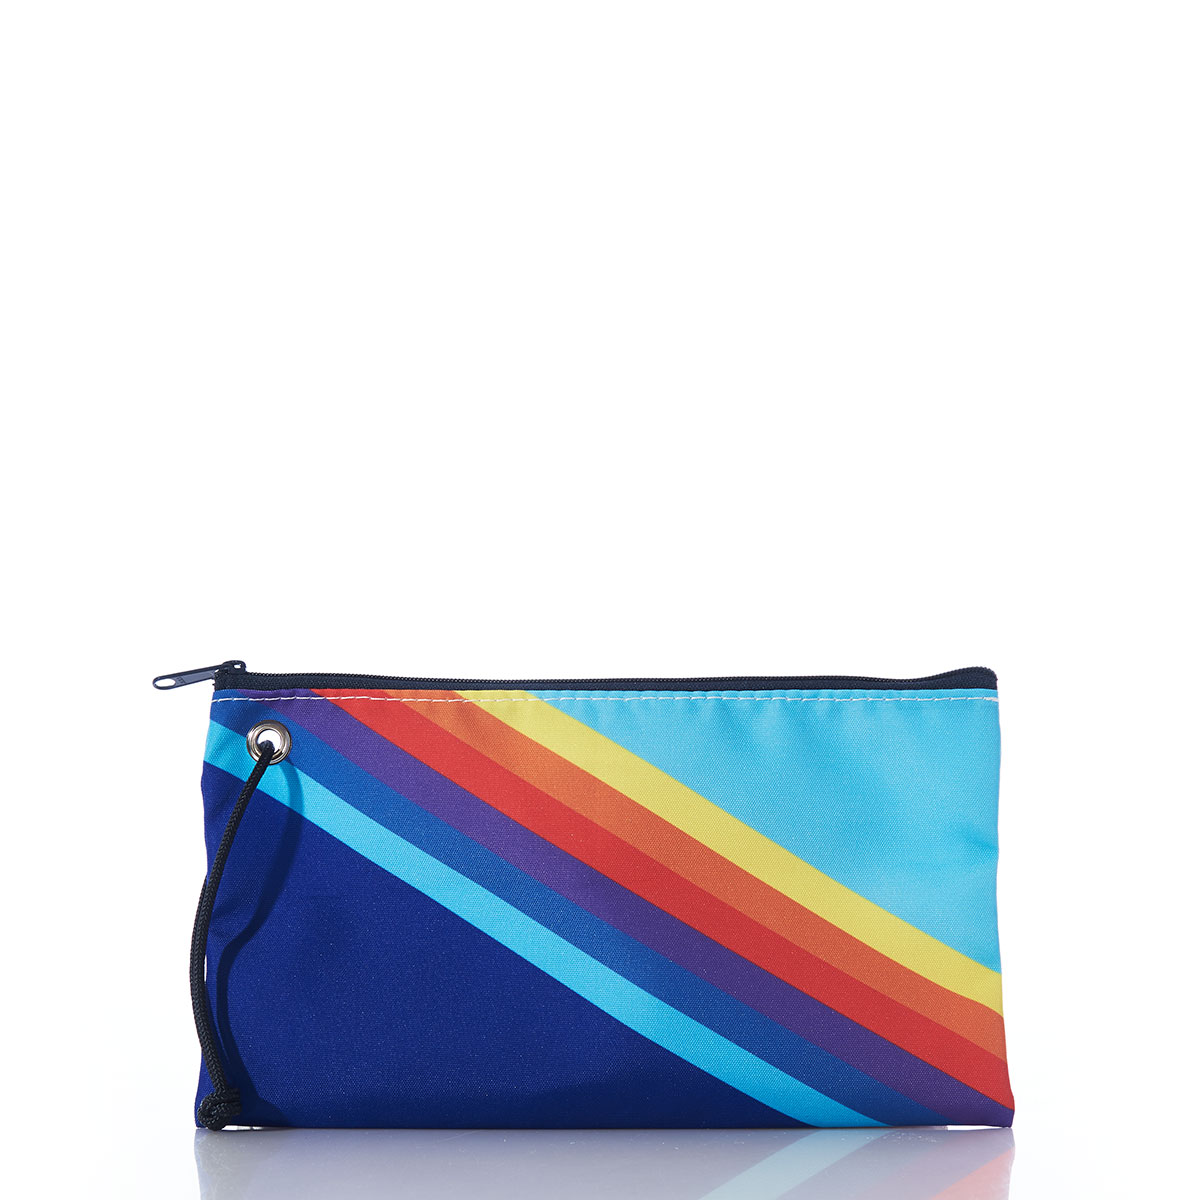 back view of a large wristlet is printed with retro stripes that range from light blue in the top left corner to dark blue in the bottom right corner, with rainbow colored stripes in between